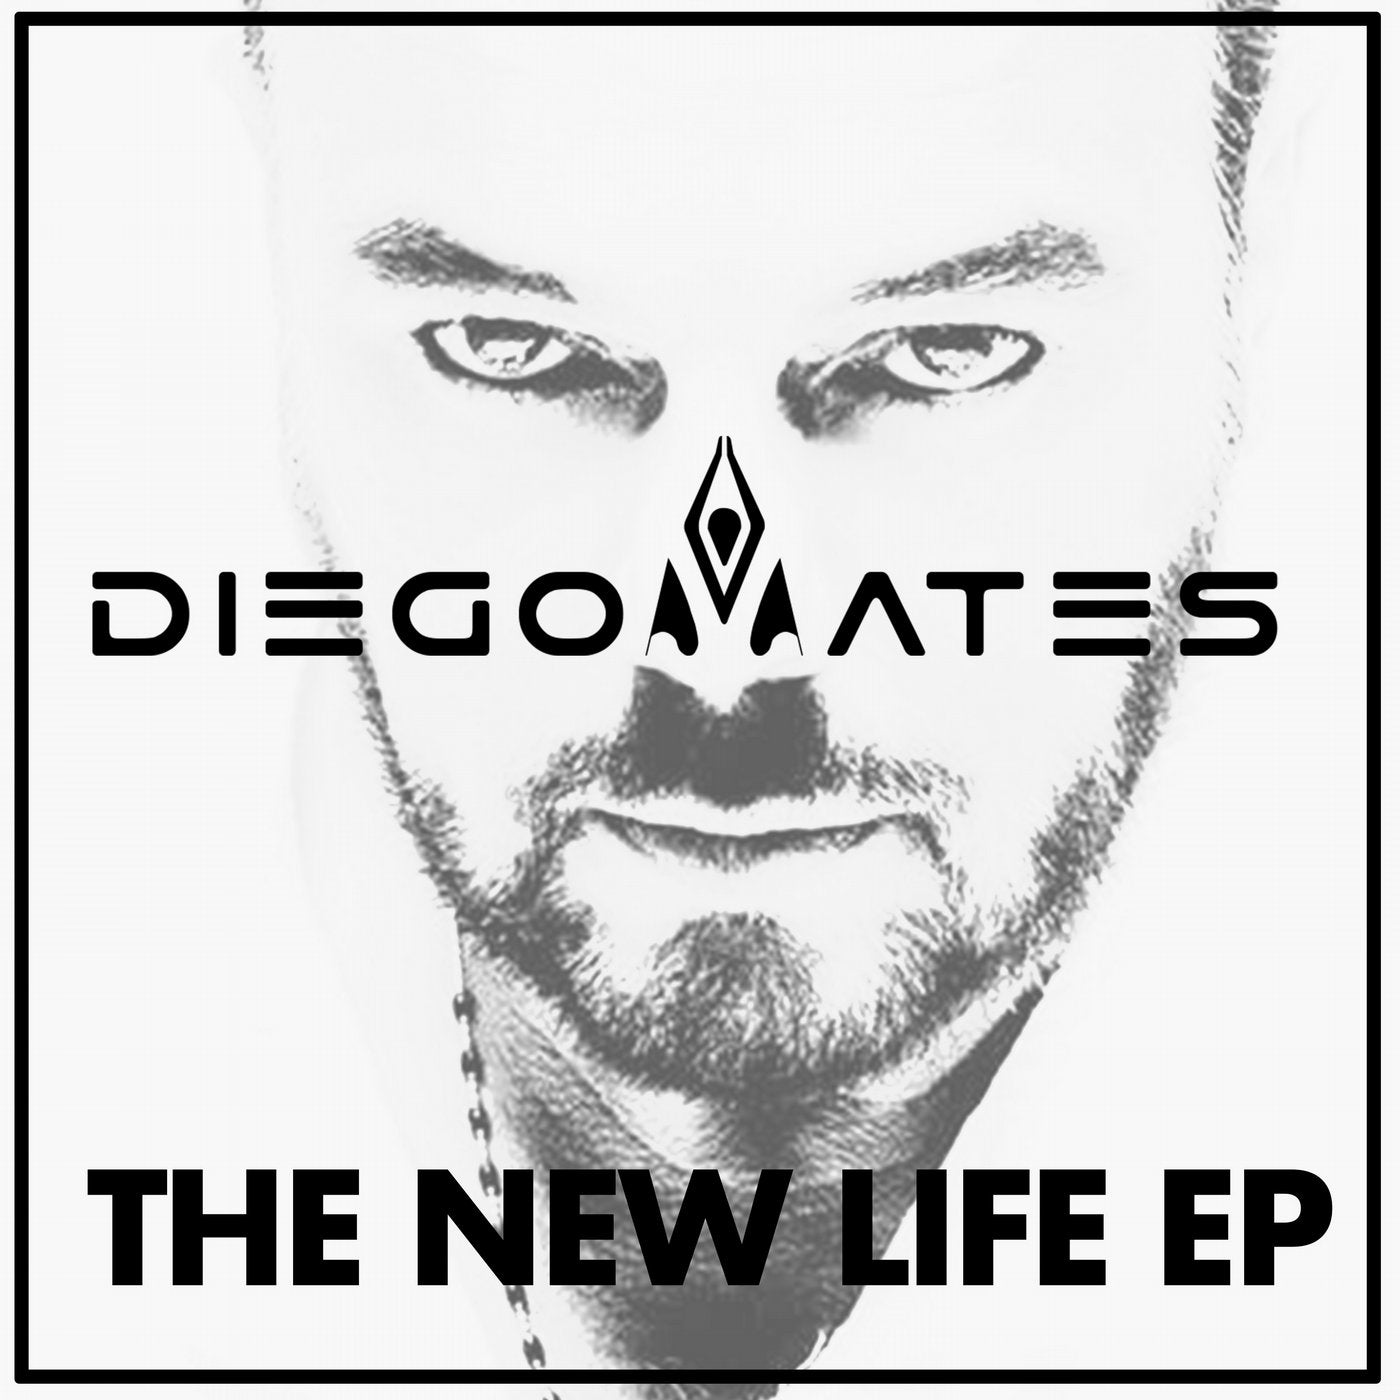 The New Life EP